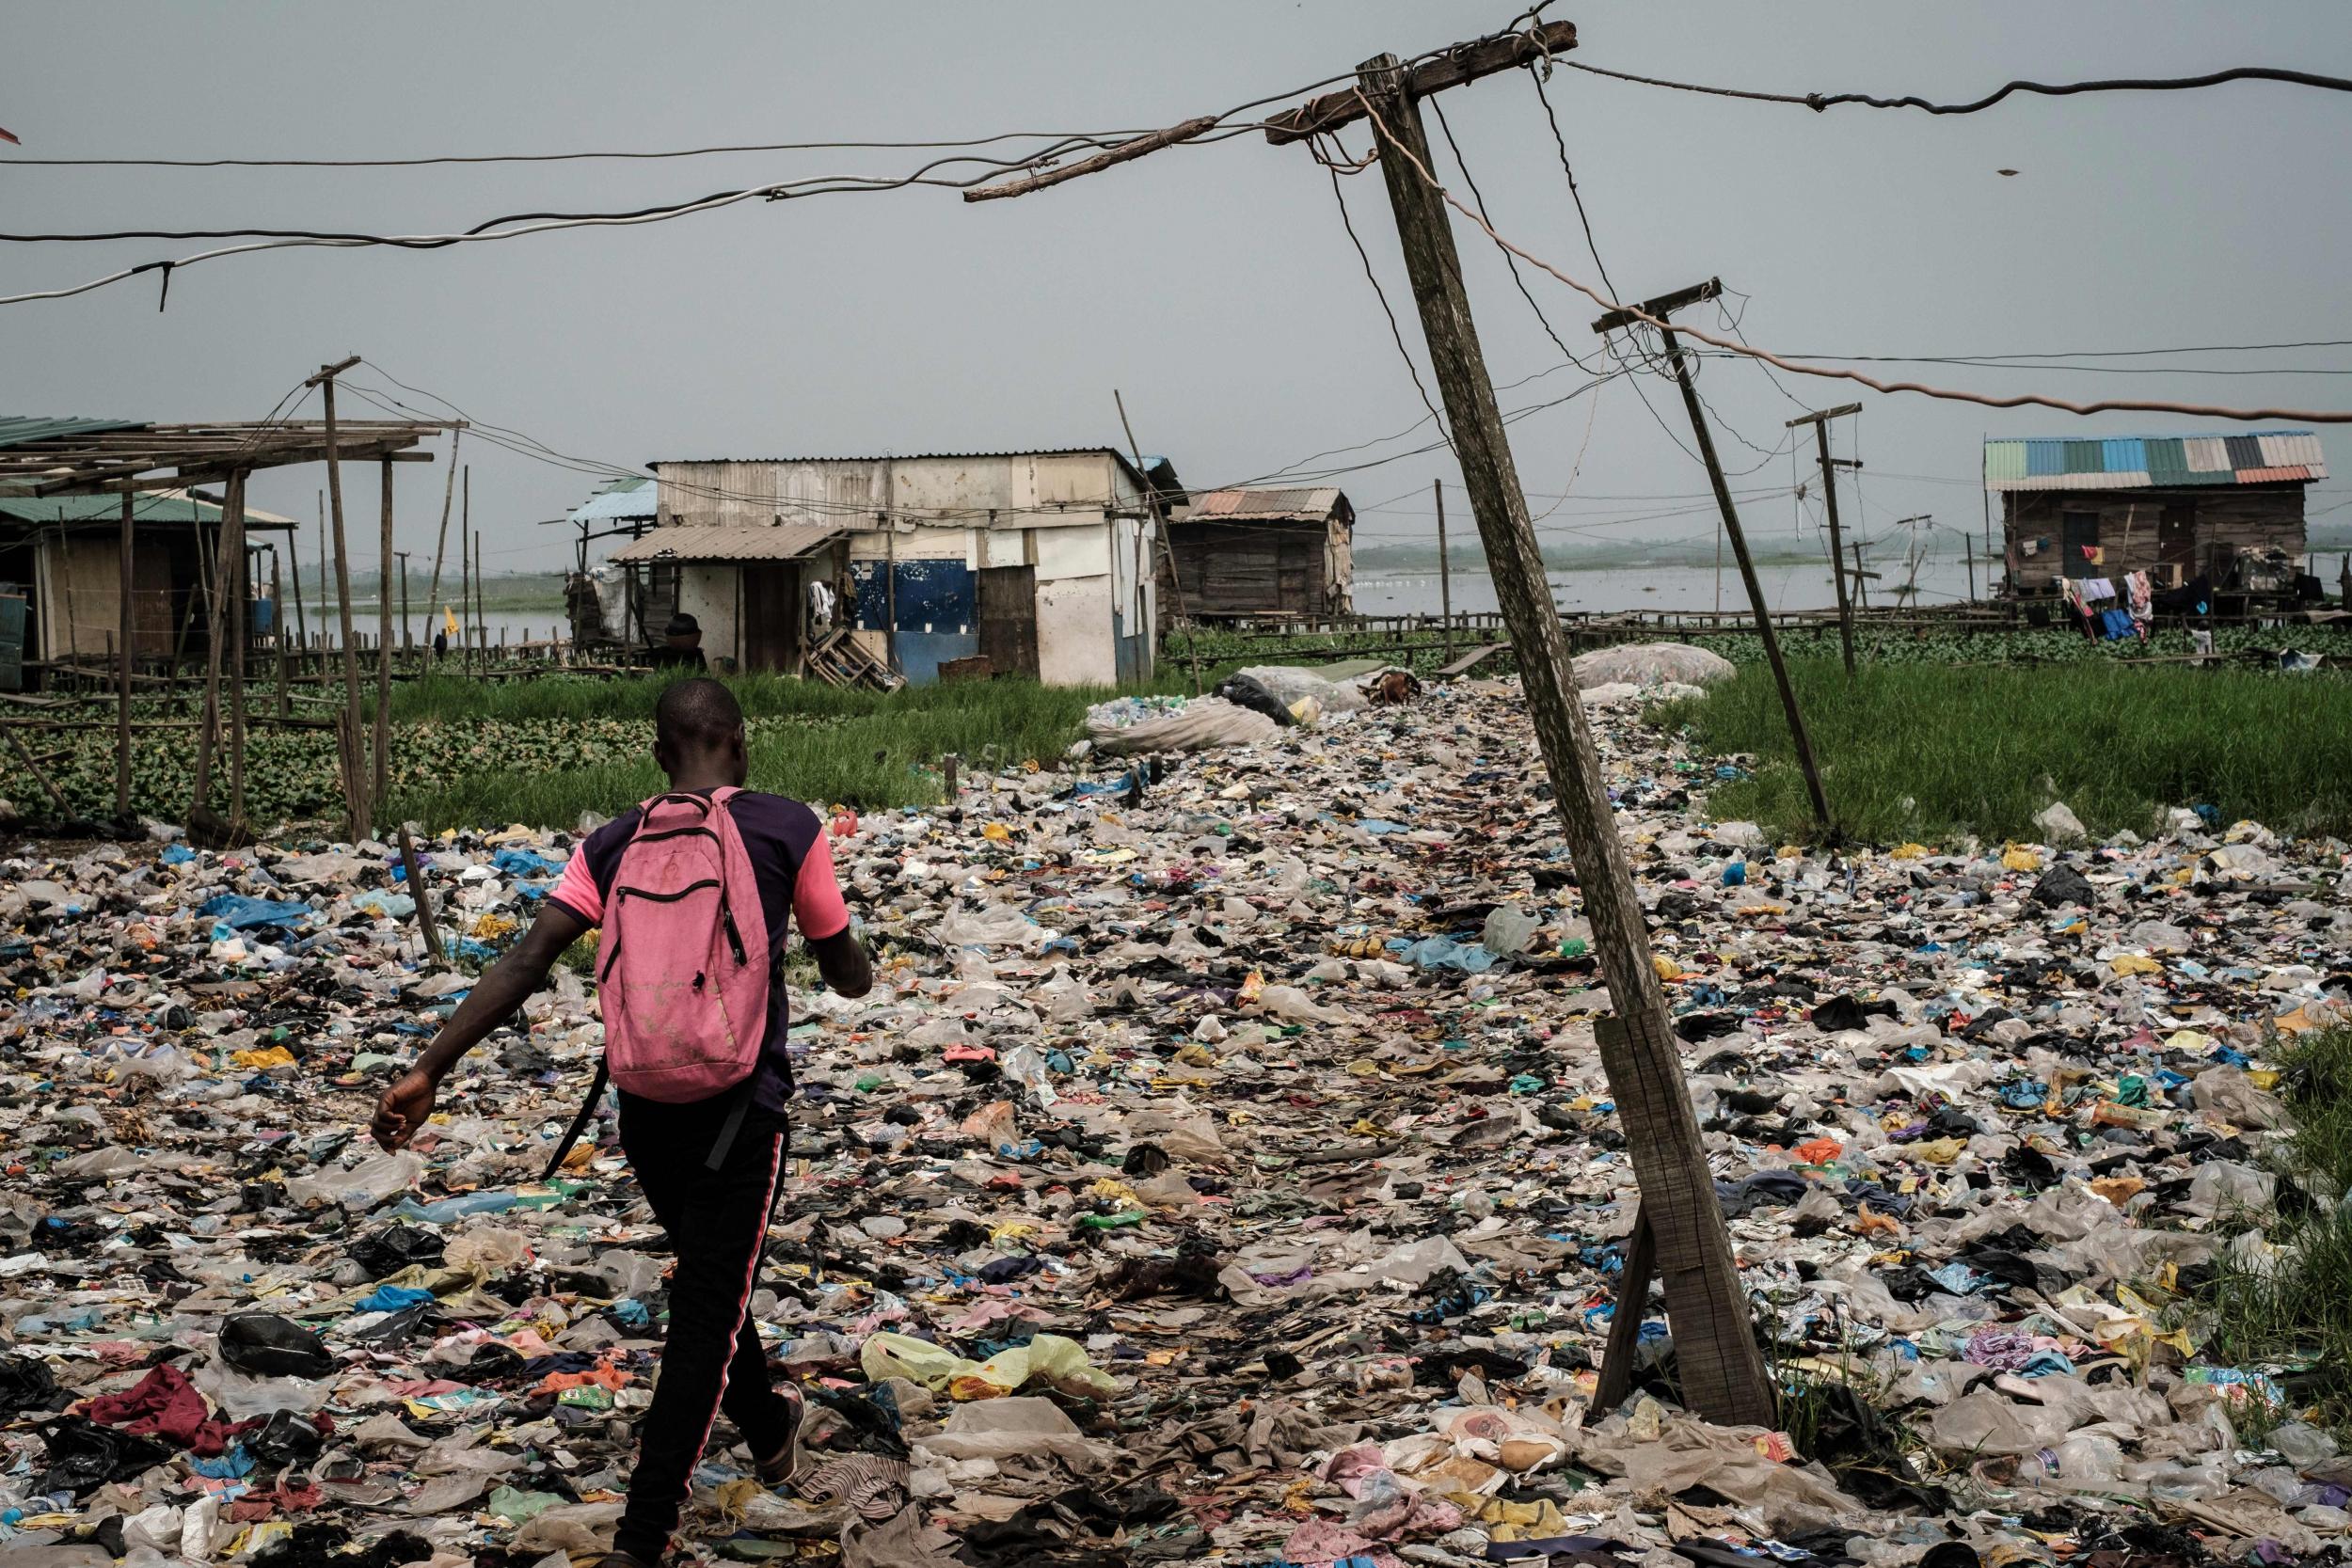 Activists in Nigeria are campaigning to reduce waste in the country